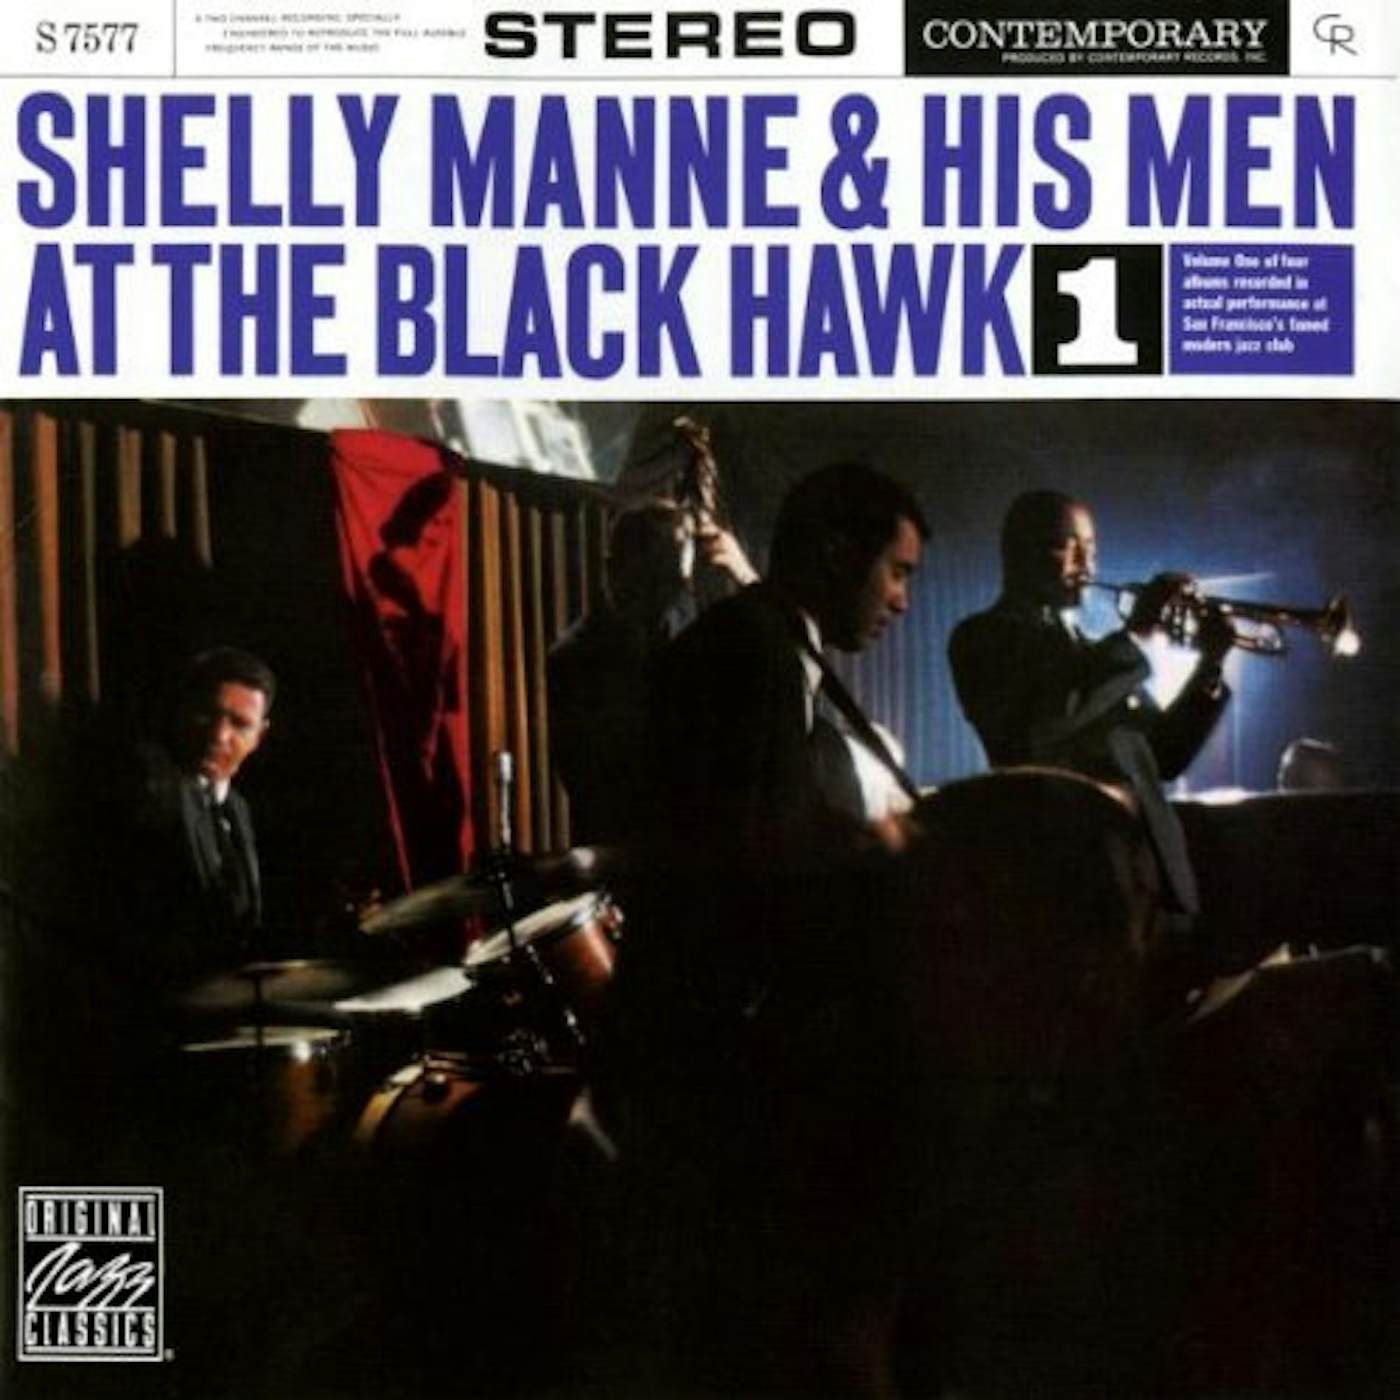 Shelly Manne & His Men LIVE AT THE BLACK HAWK 1 CD